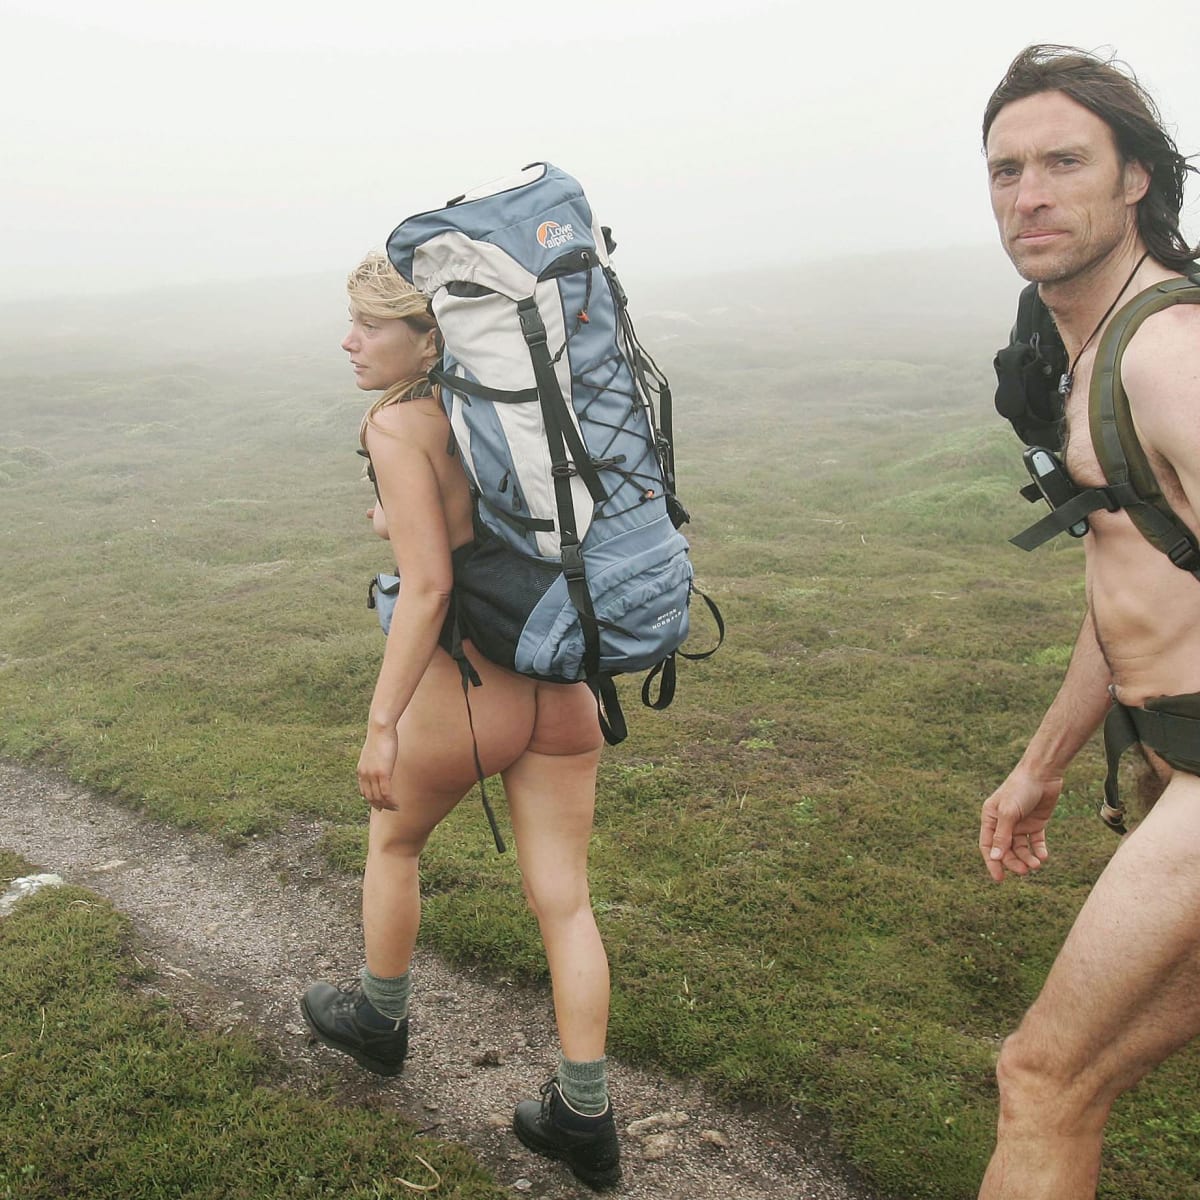 Happy Nude Hiking Day! Heres How to (Legally) Make the Most of It